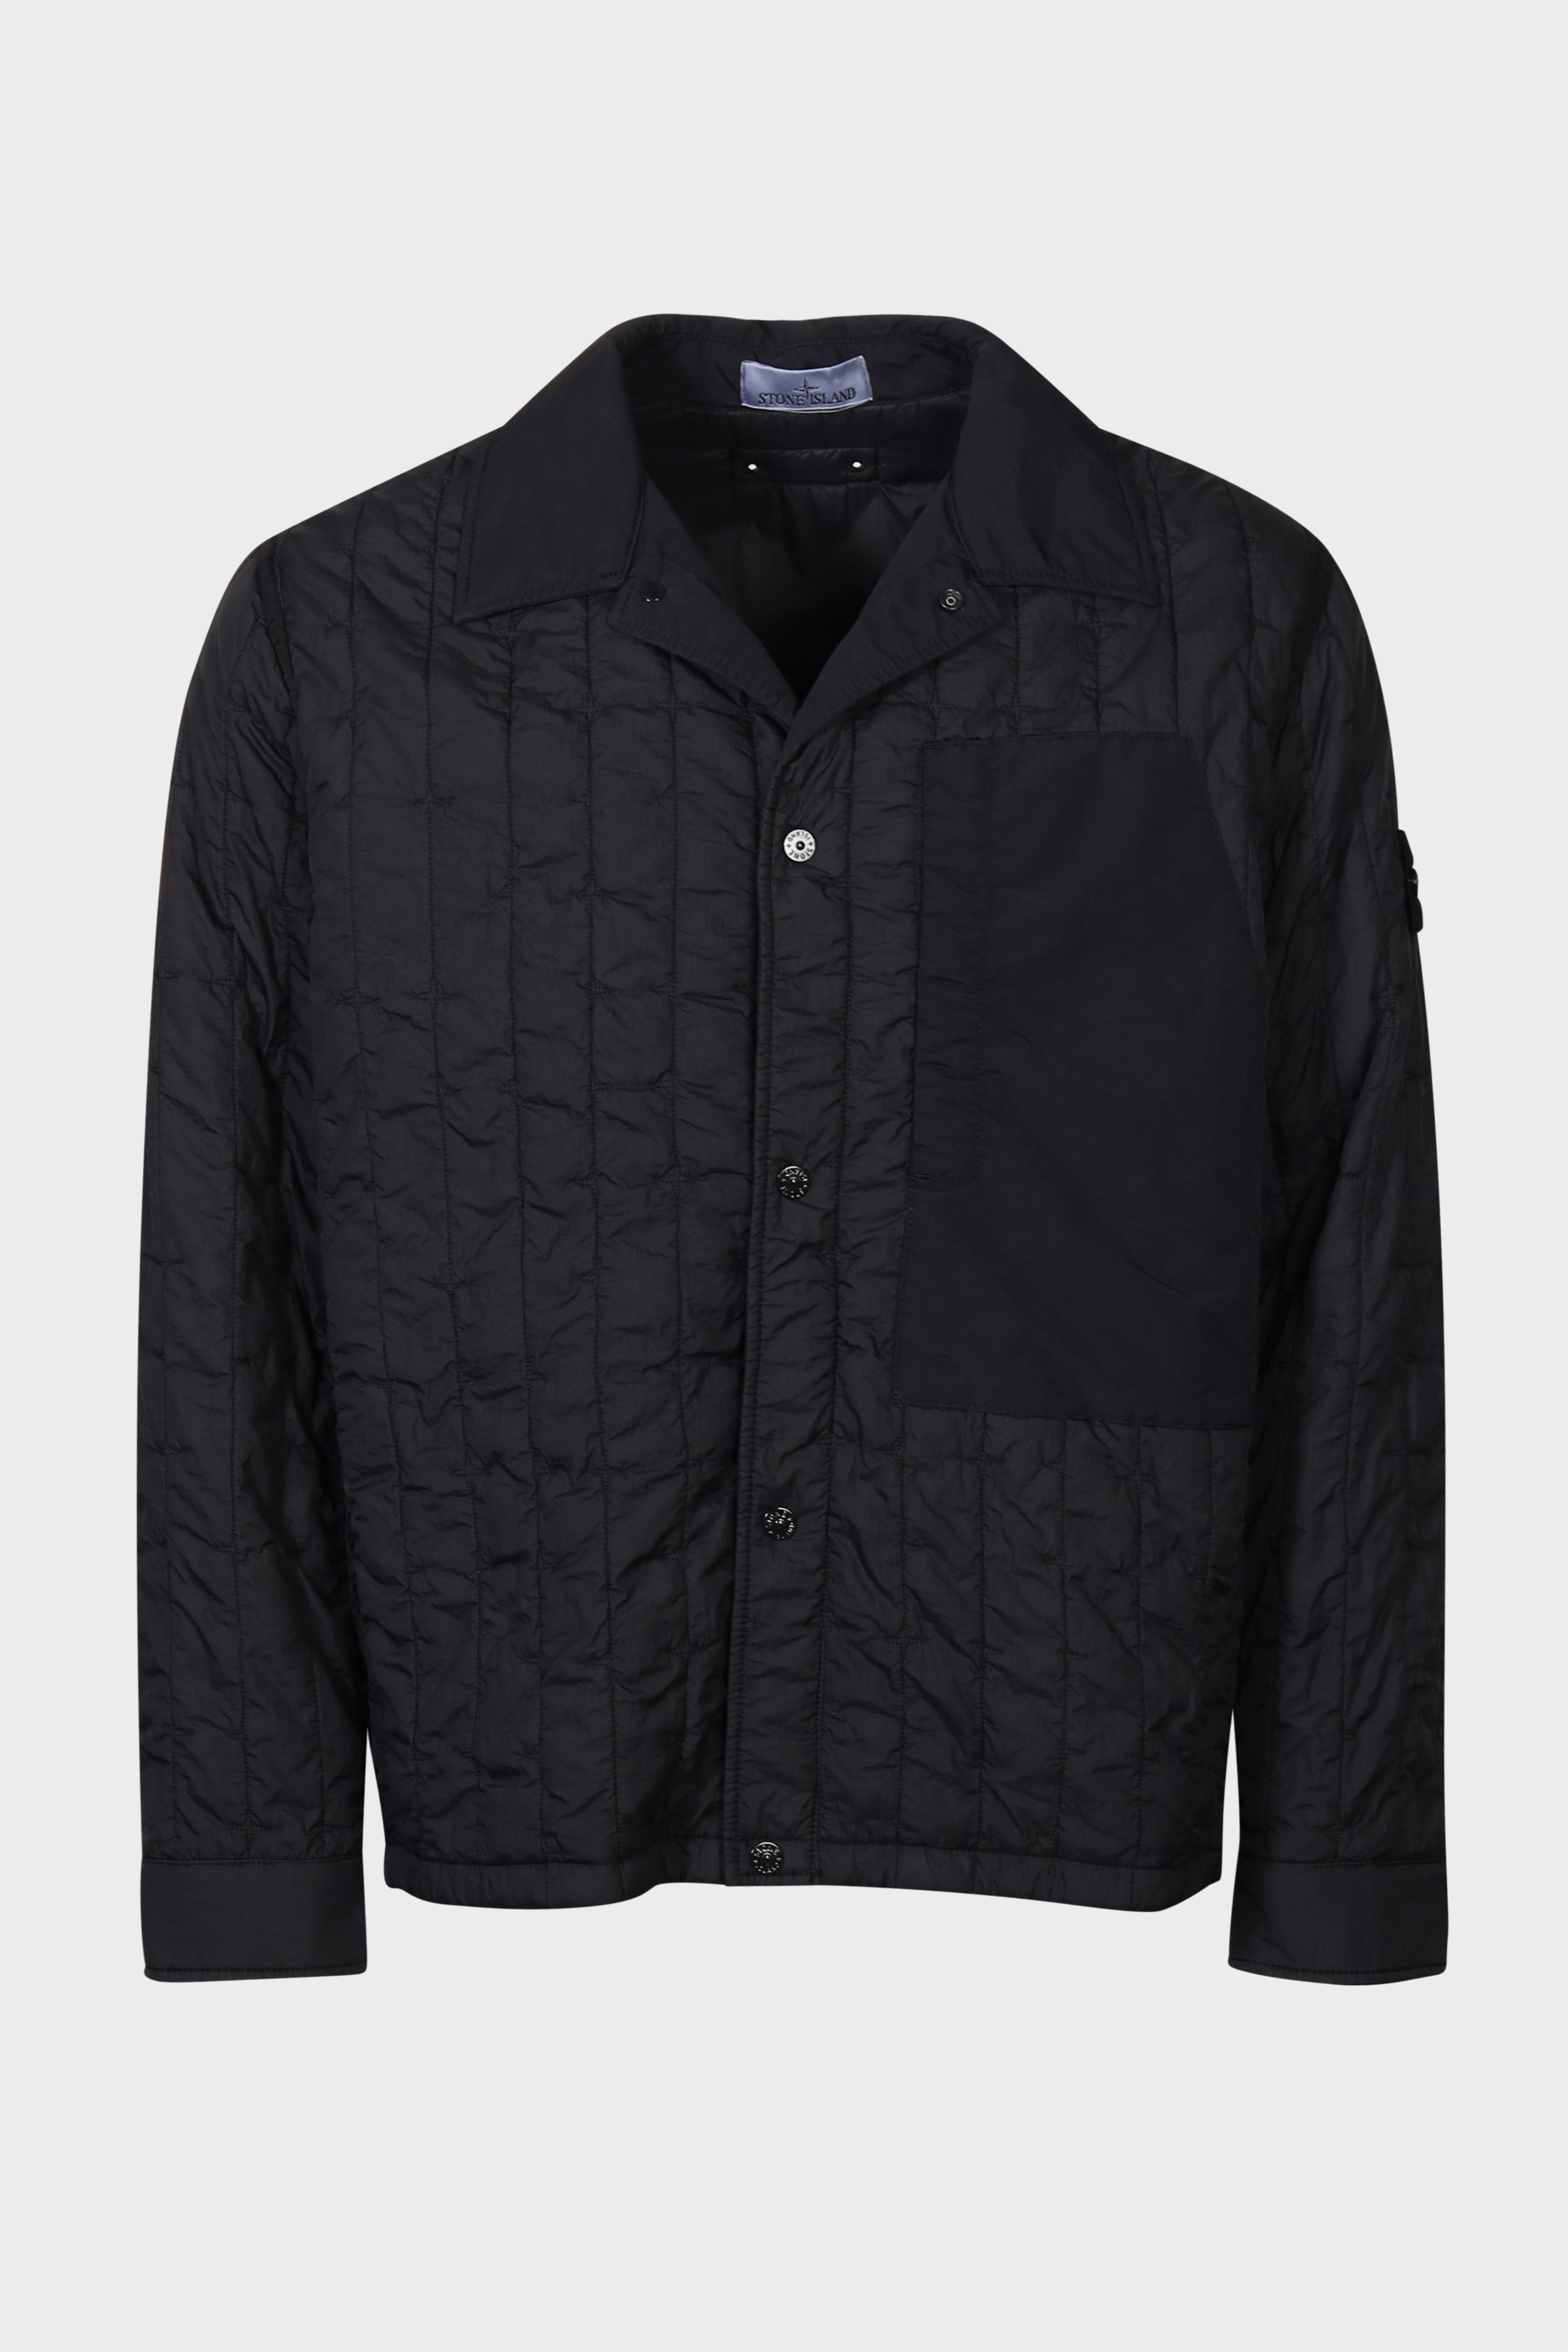 STONE ISLAND Quilted Nylon Stella Jacket in Black S